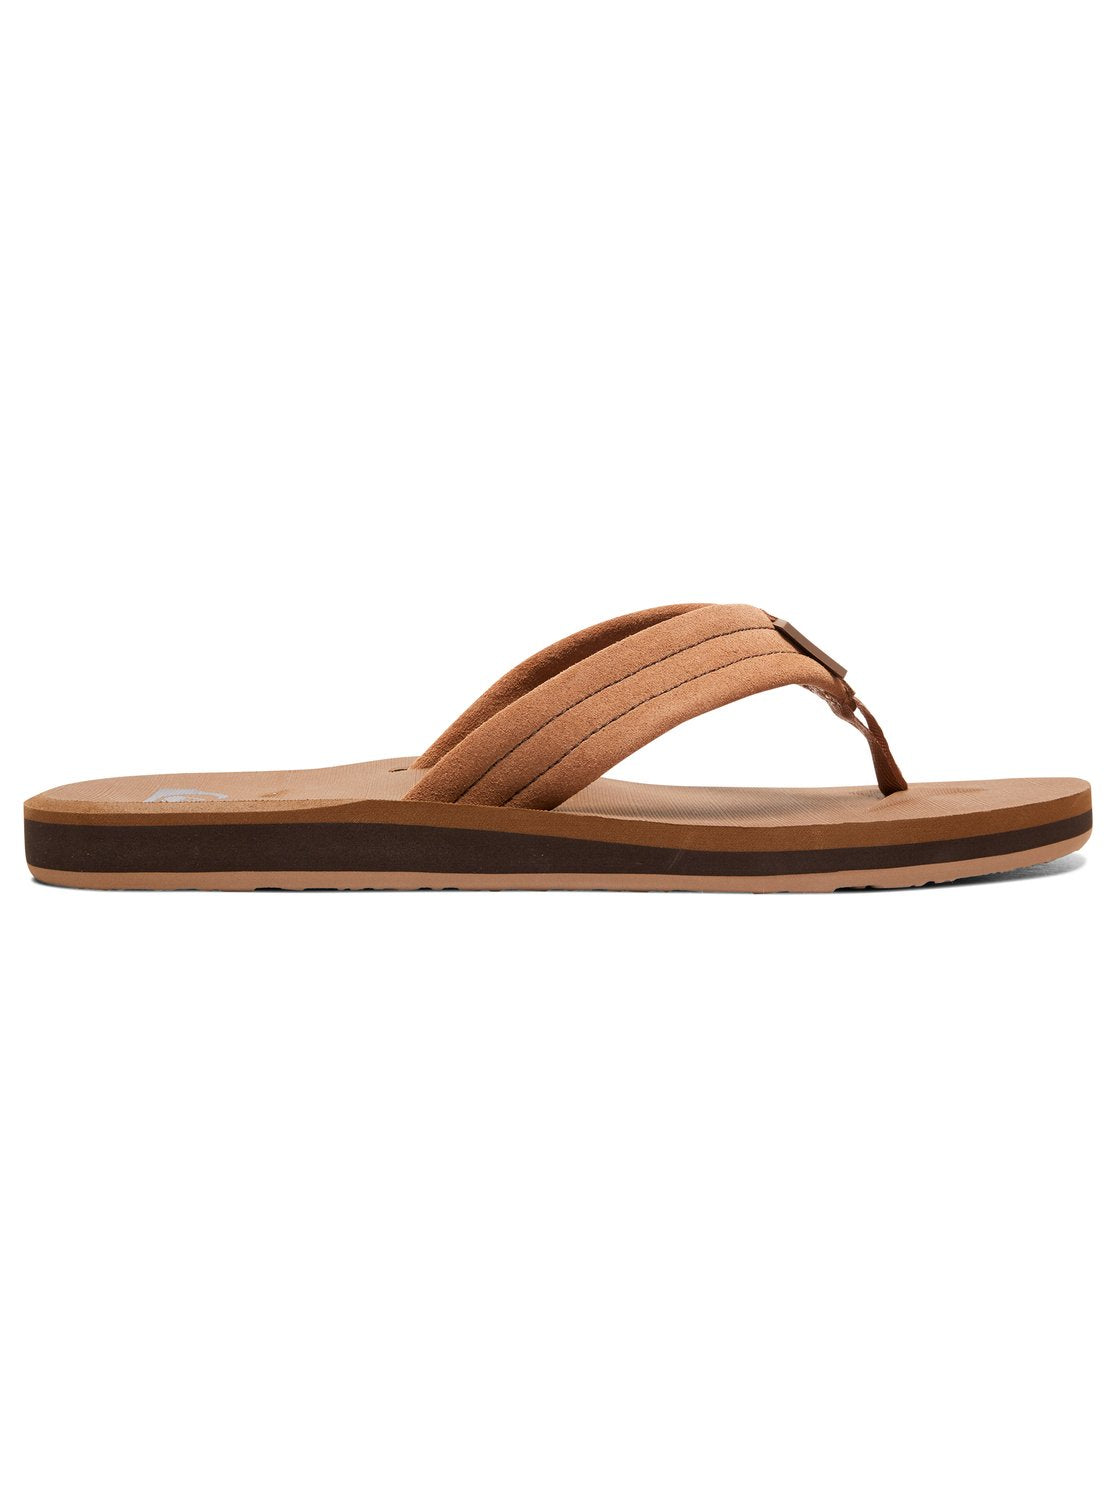 Quiksilver Carver Suede Youth Sandal TKD0-Tan 2 Y